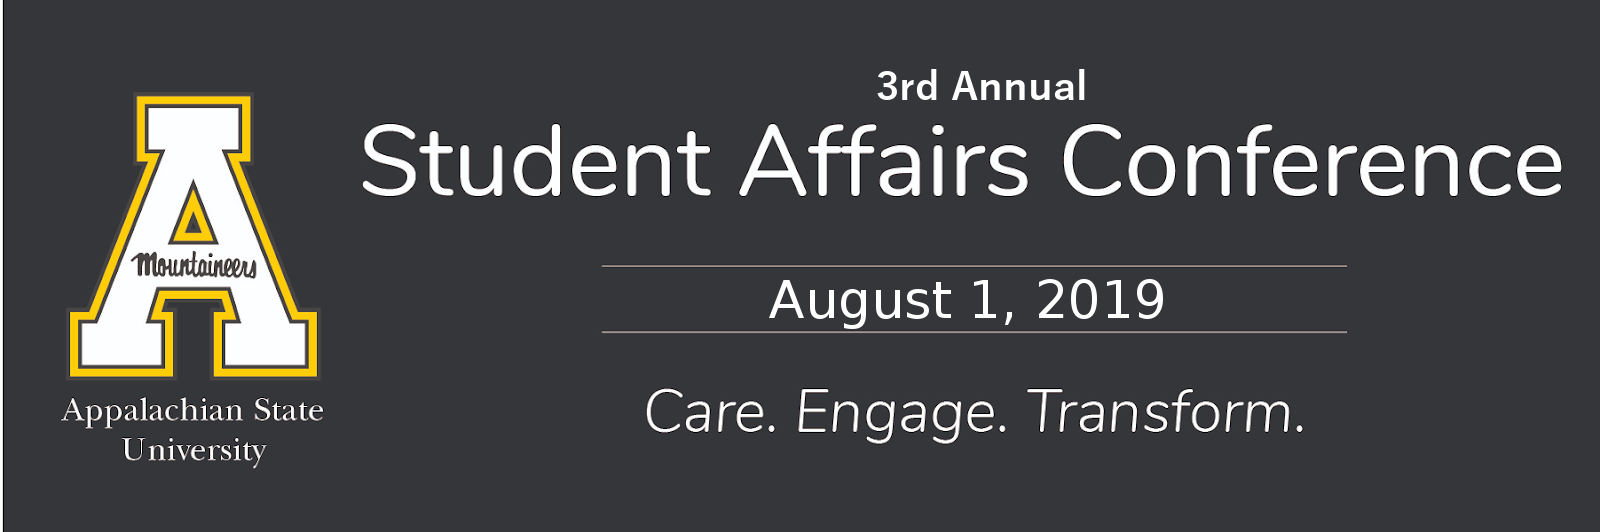 Student Affairs Conference 2019